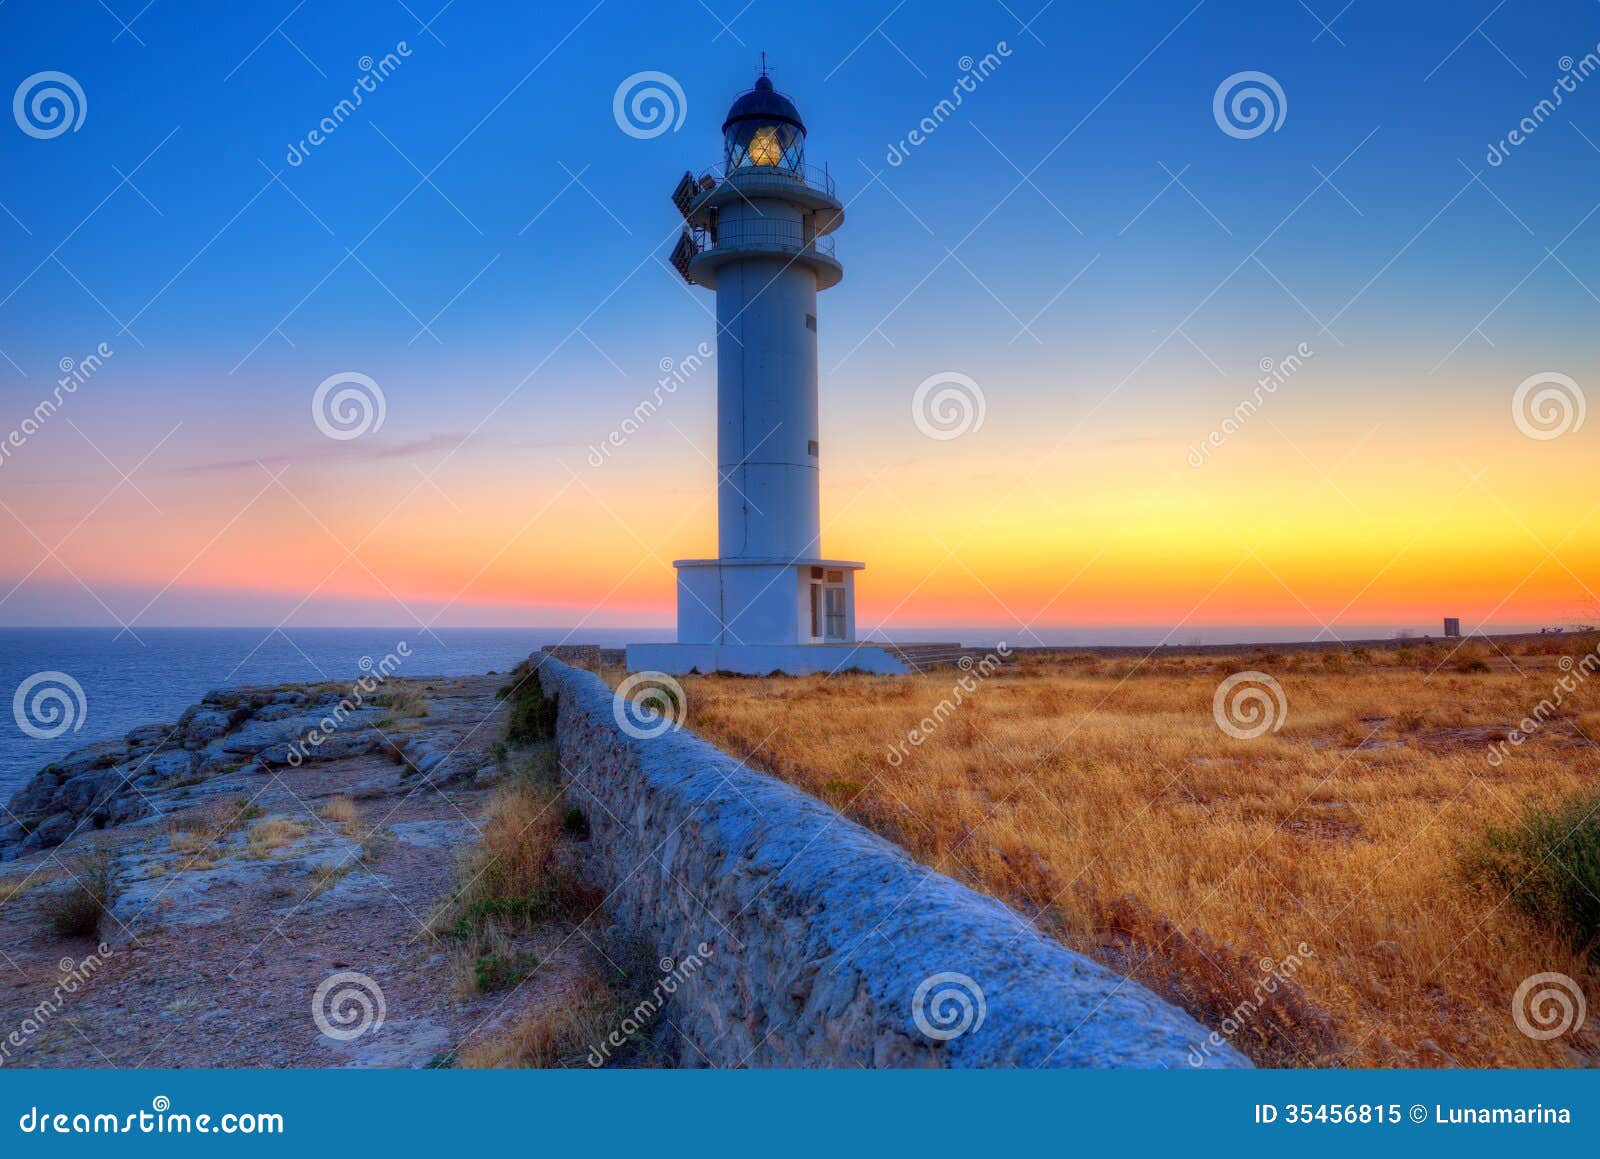 formentera sunset in barbaria cape lighthouse